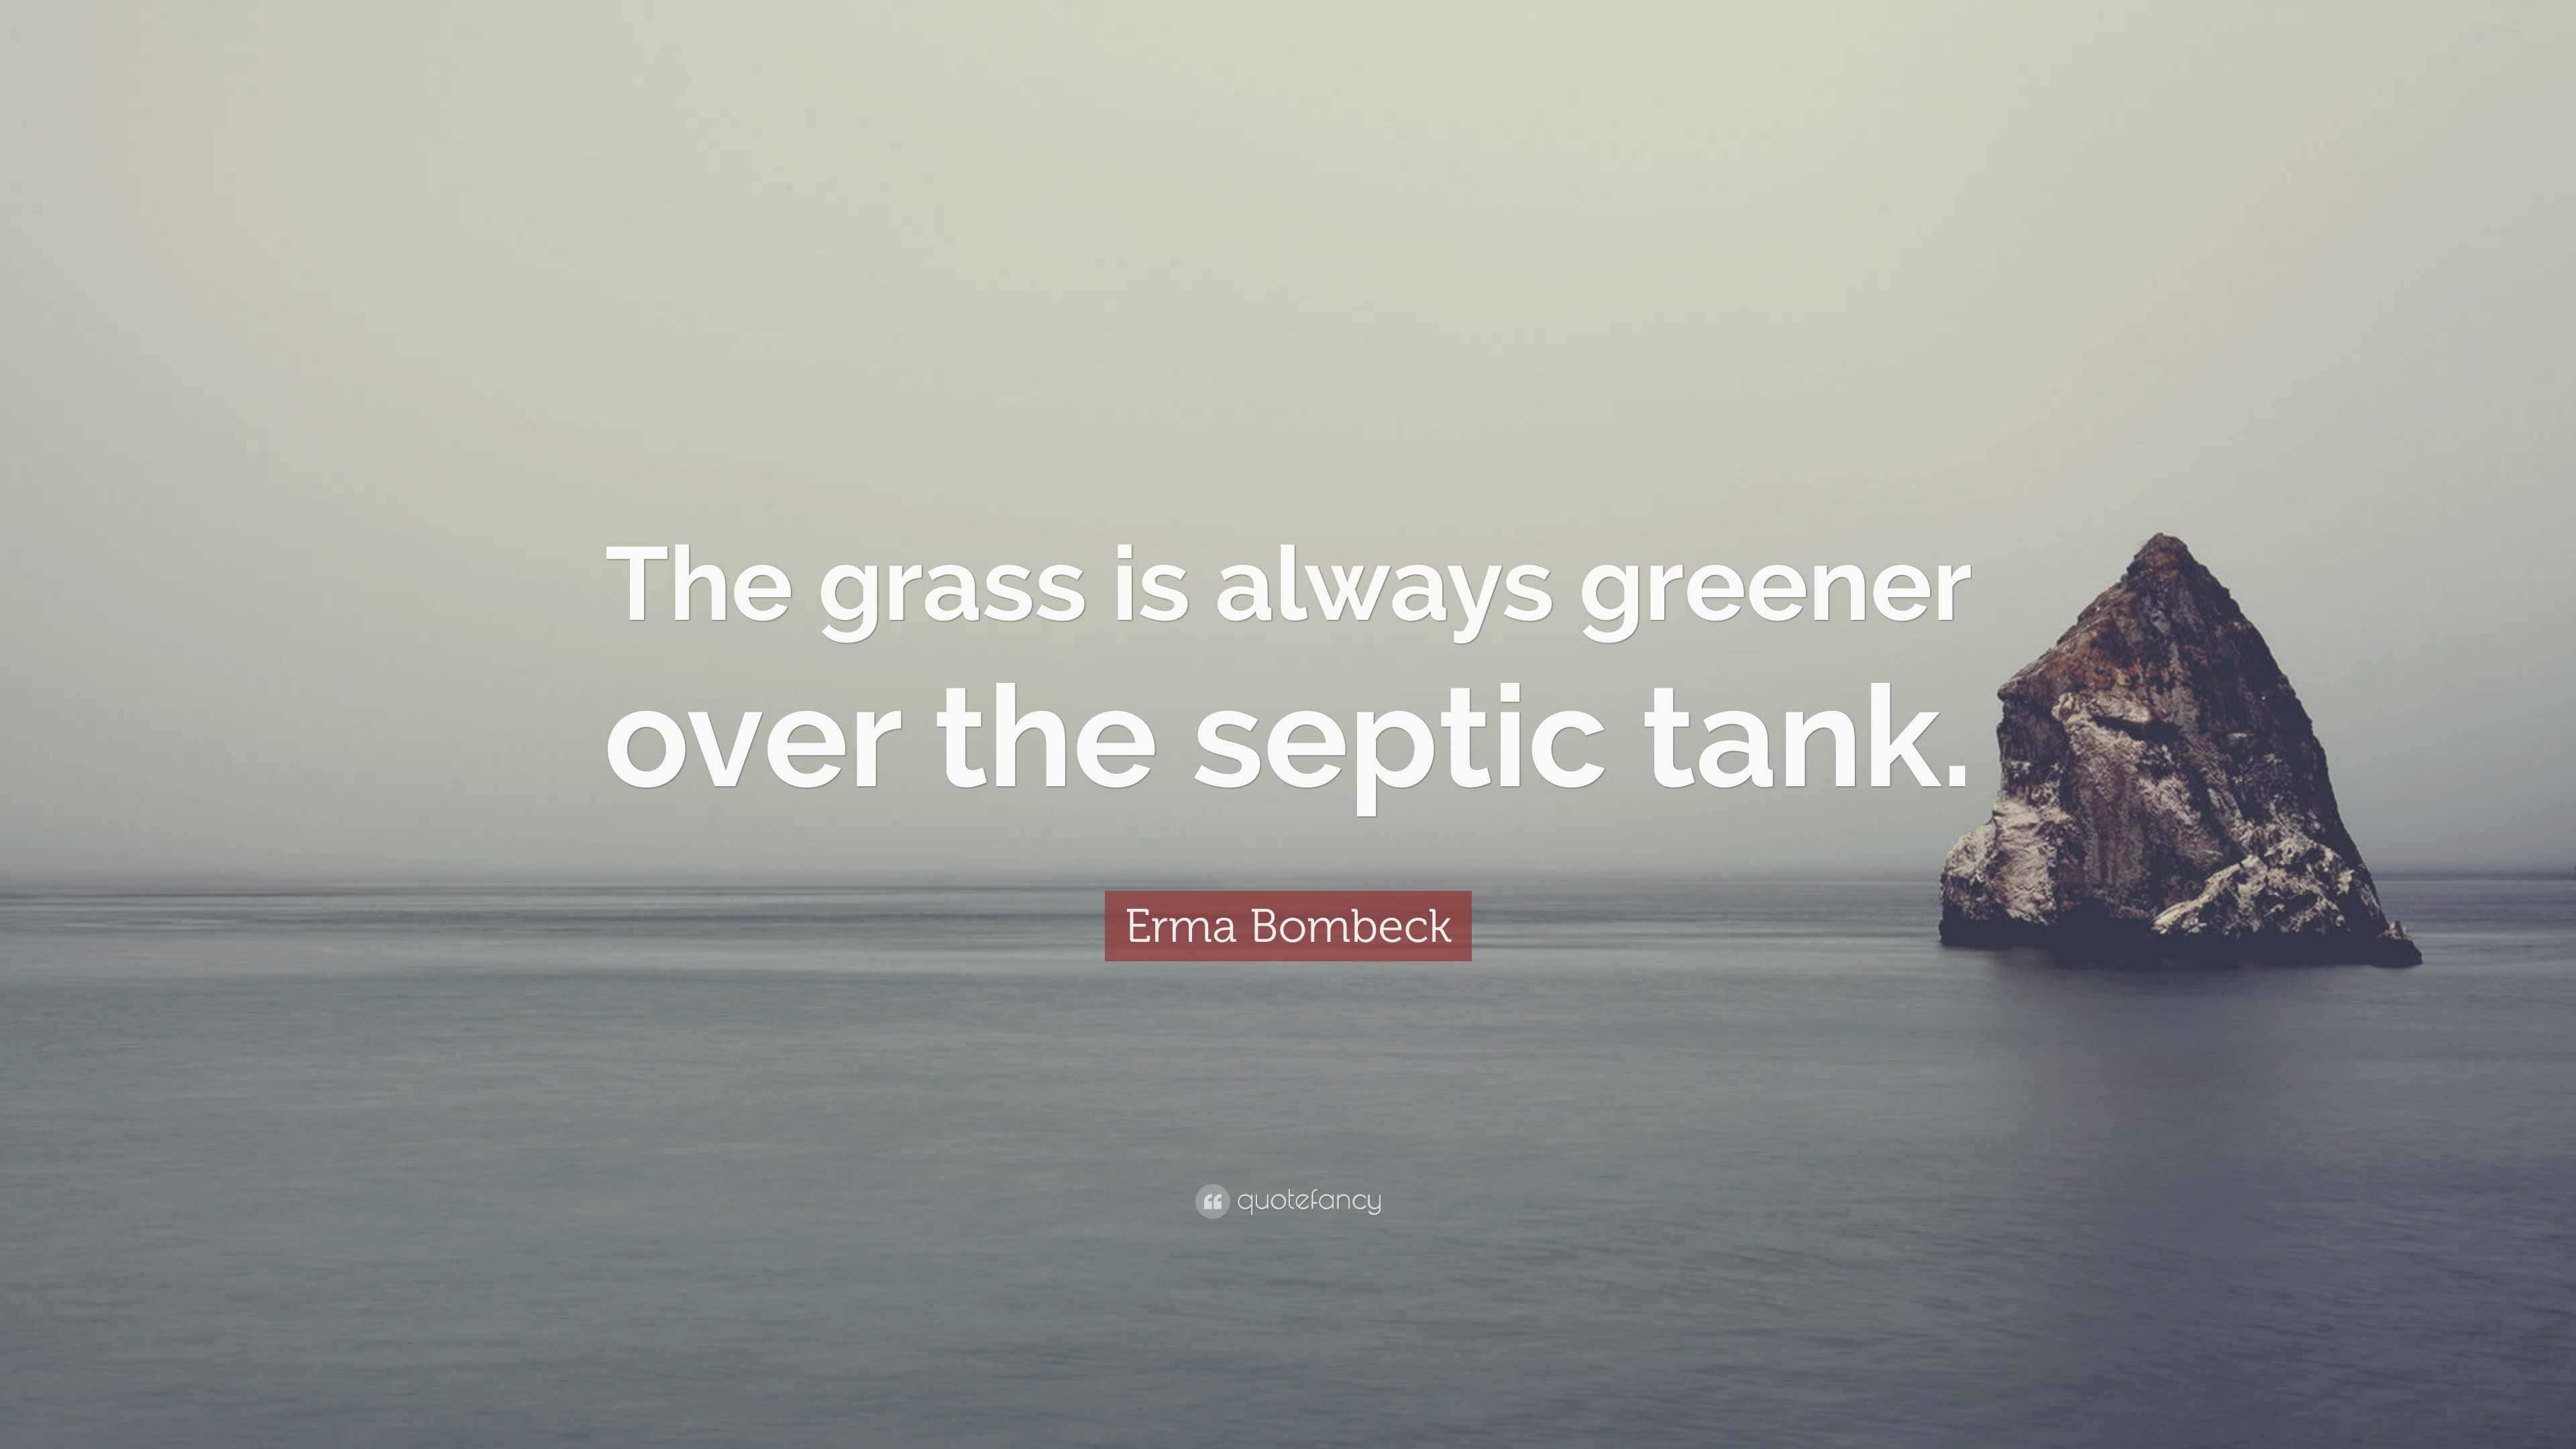 life is always greener over the septic tank